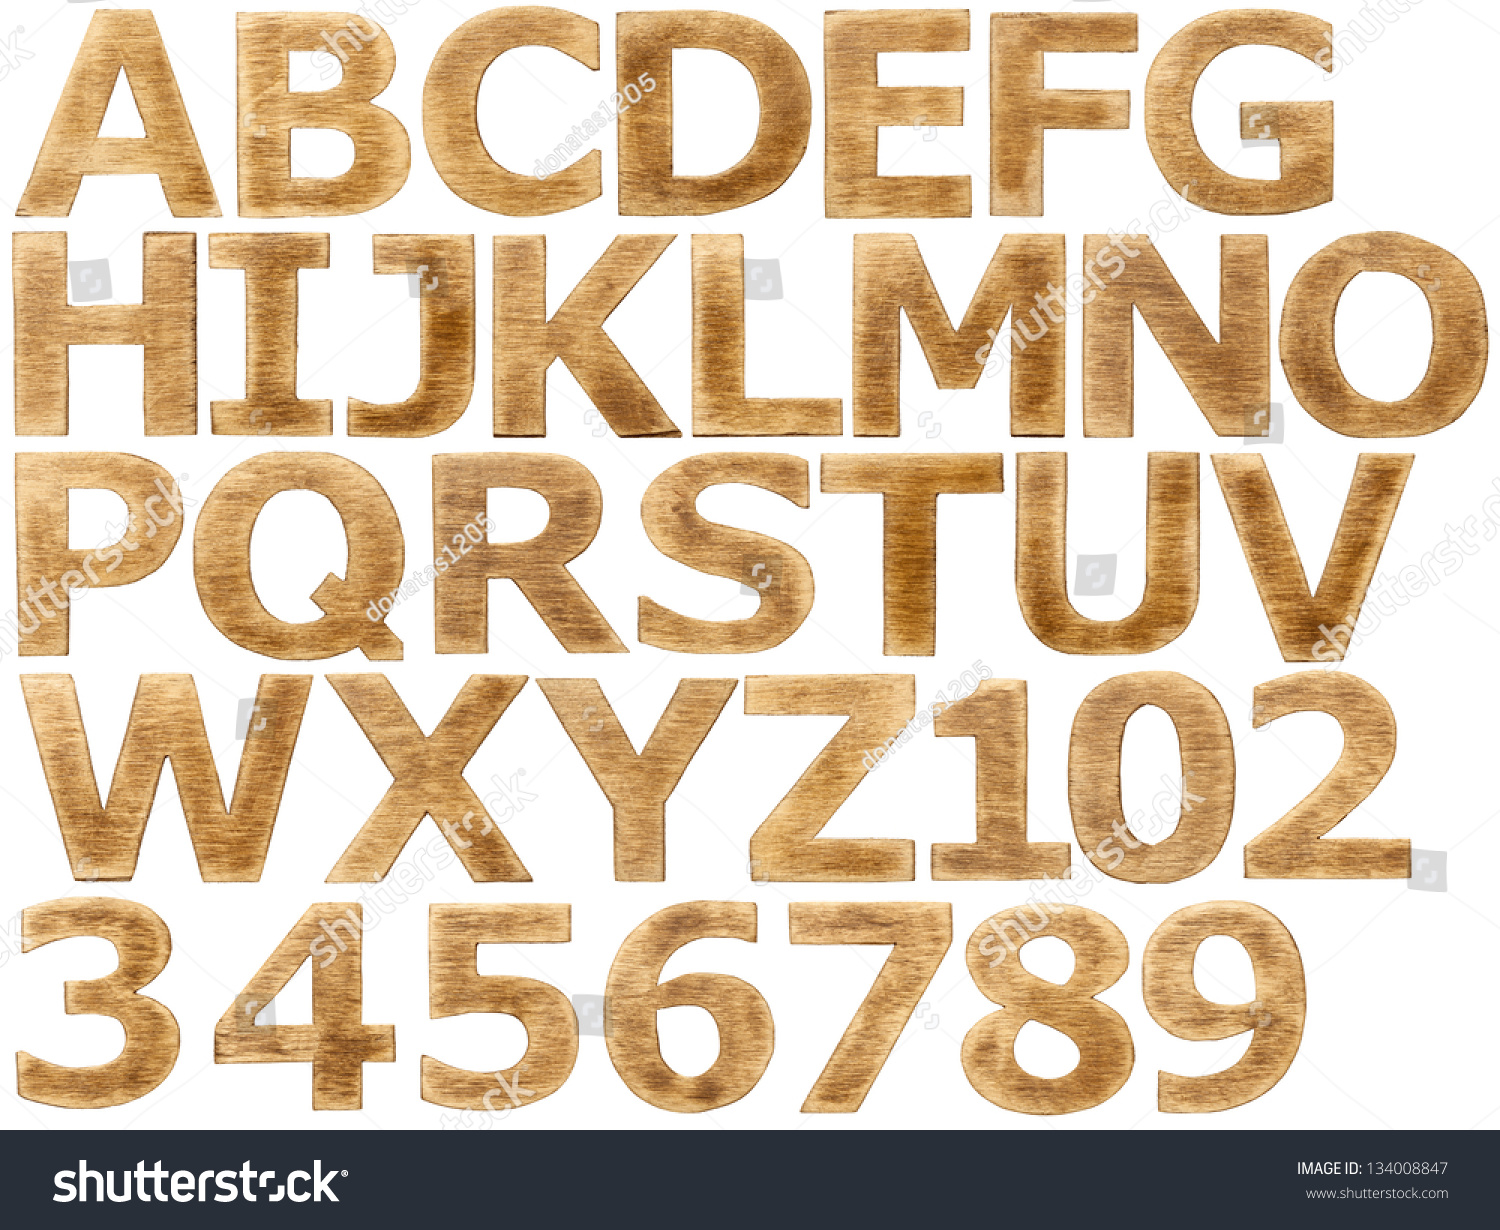 Wooden Alphabet Letters Numbers Stock Photo 134008847 - Shutterstock